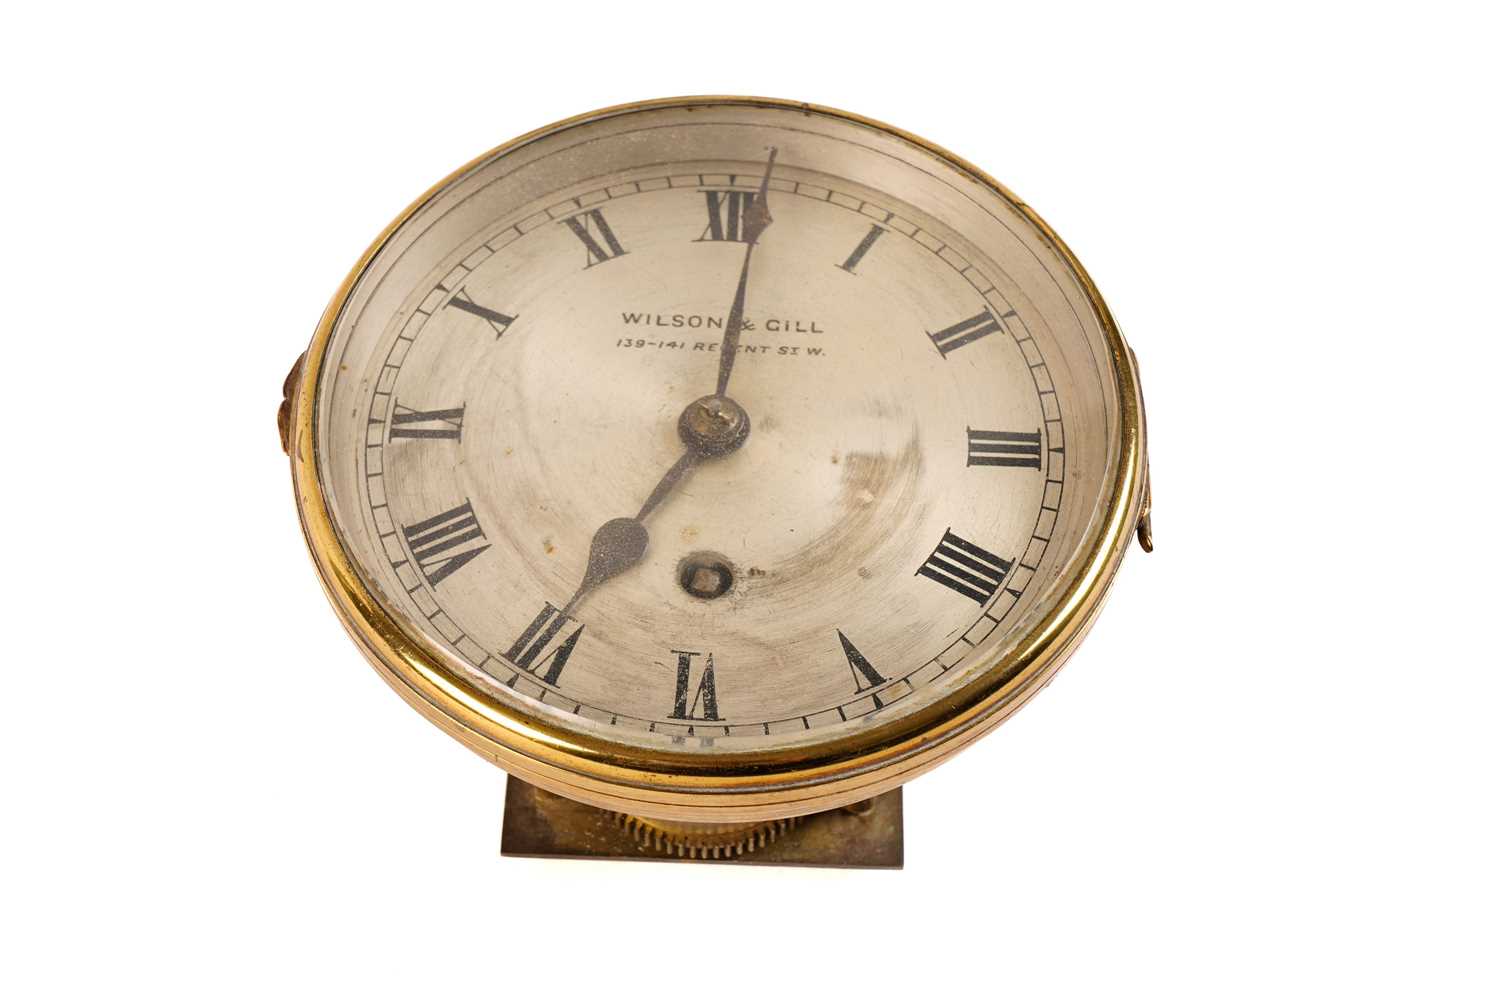 A brass cased ships clock dial and movement